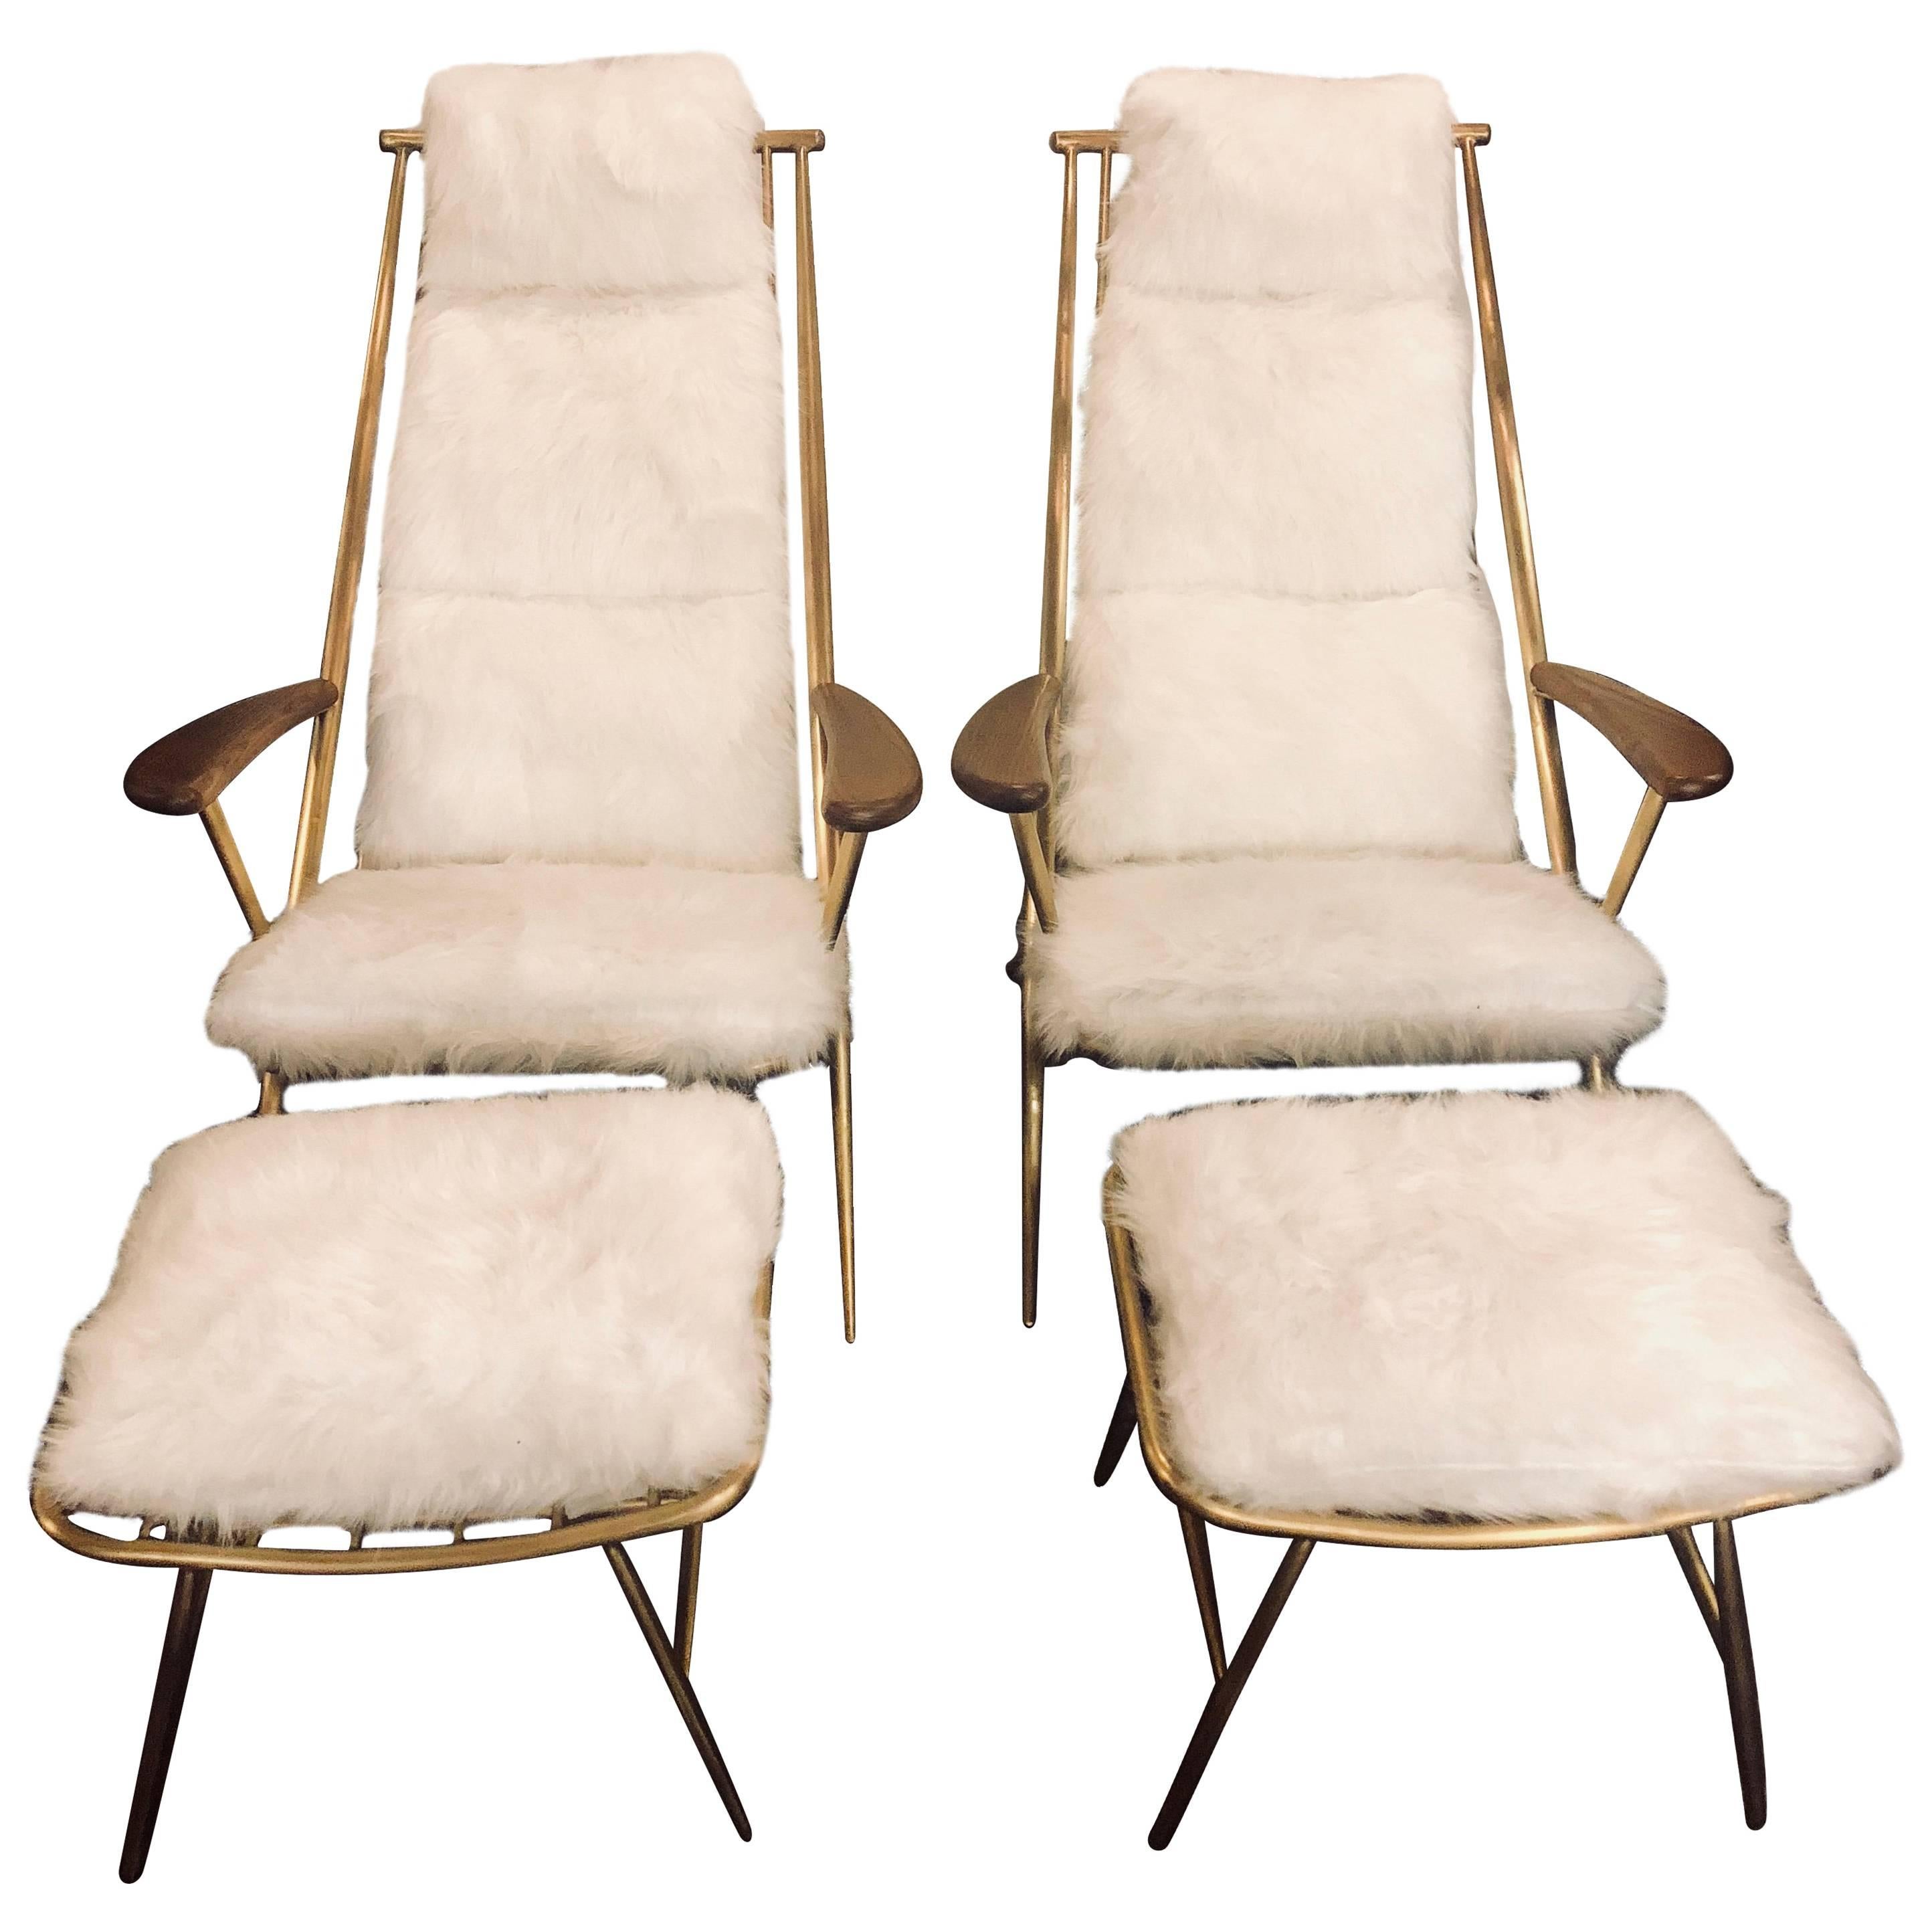 Hollywood Regency Style, Lounge Chairs, Ottomans, White, Shearling, Metal, 1990s For Sale